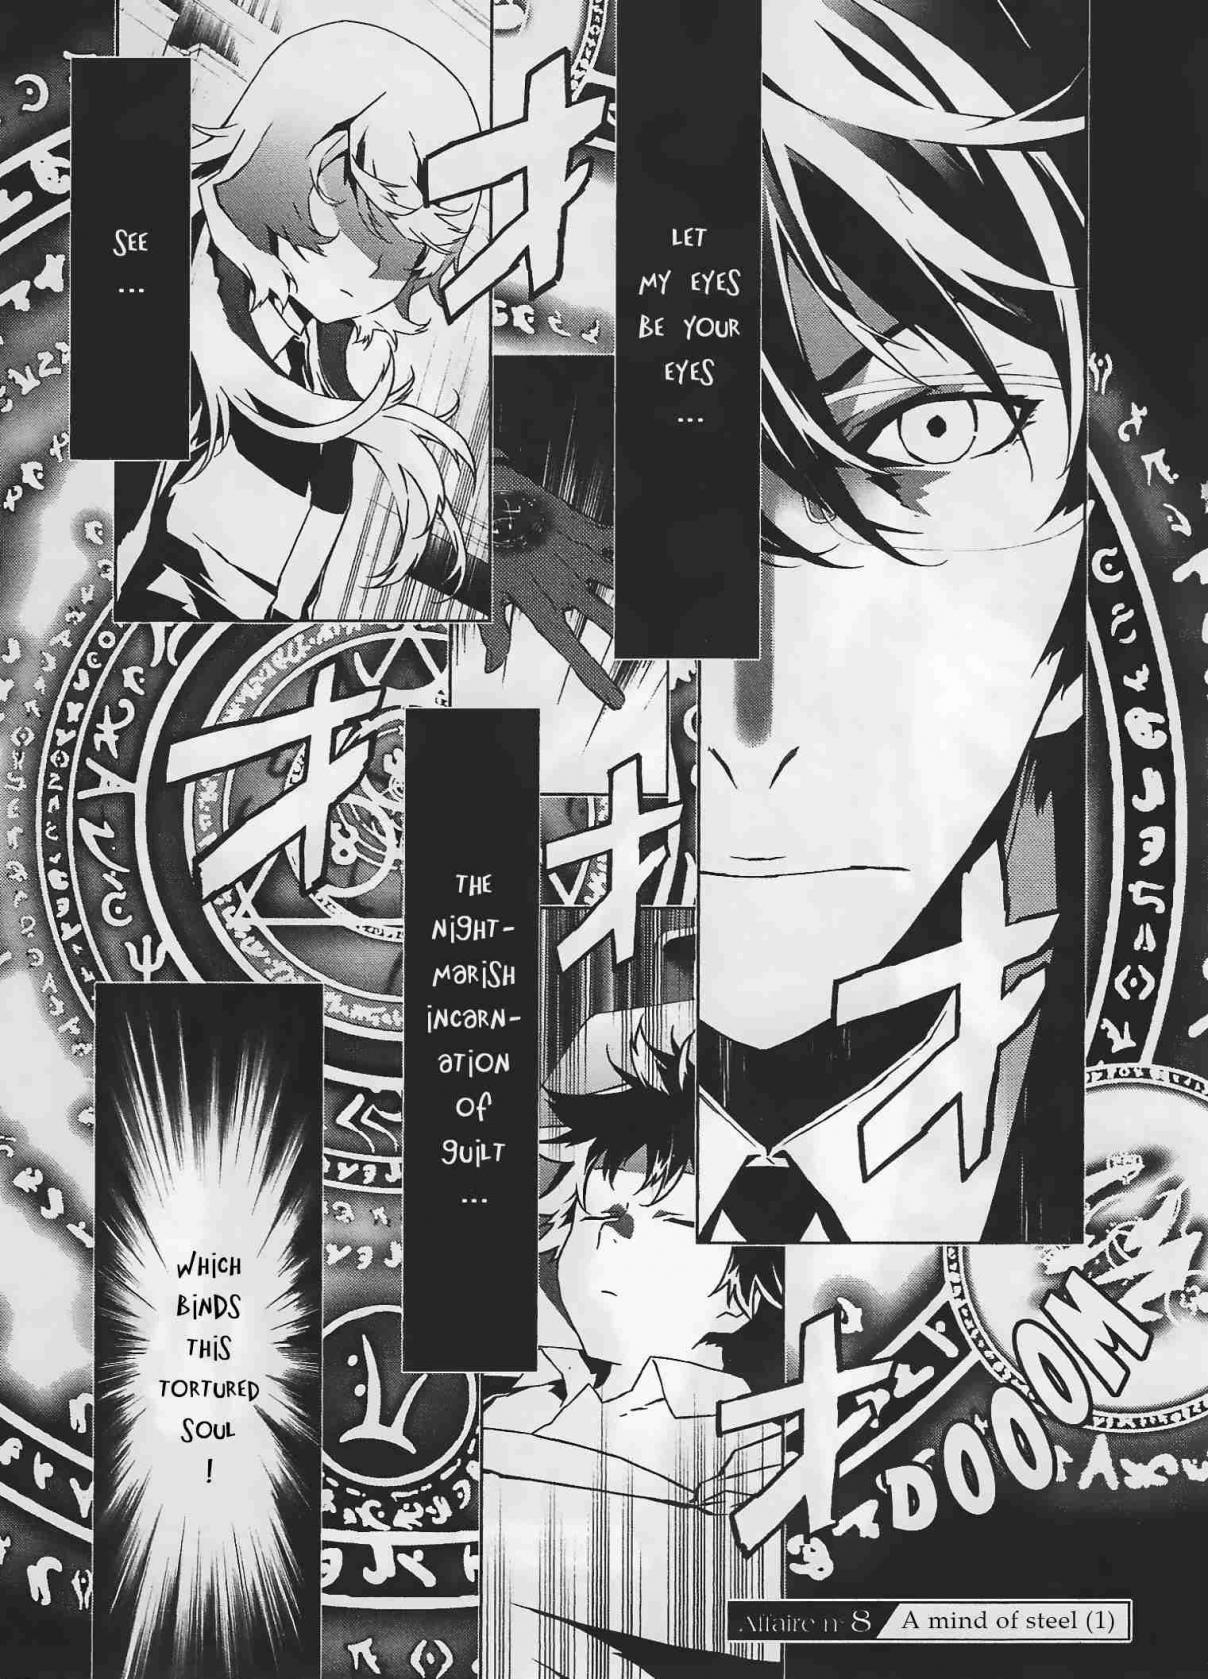 Evil Eater Vol. 2 Ch. 8 A Mind of Steel (1)